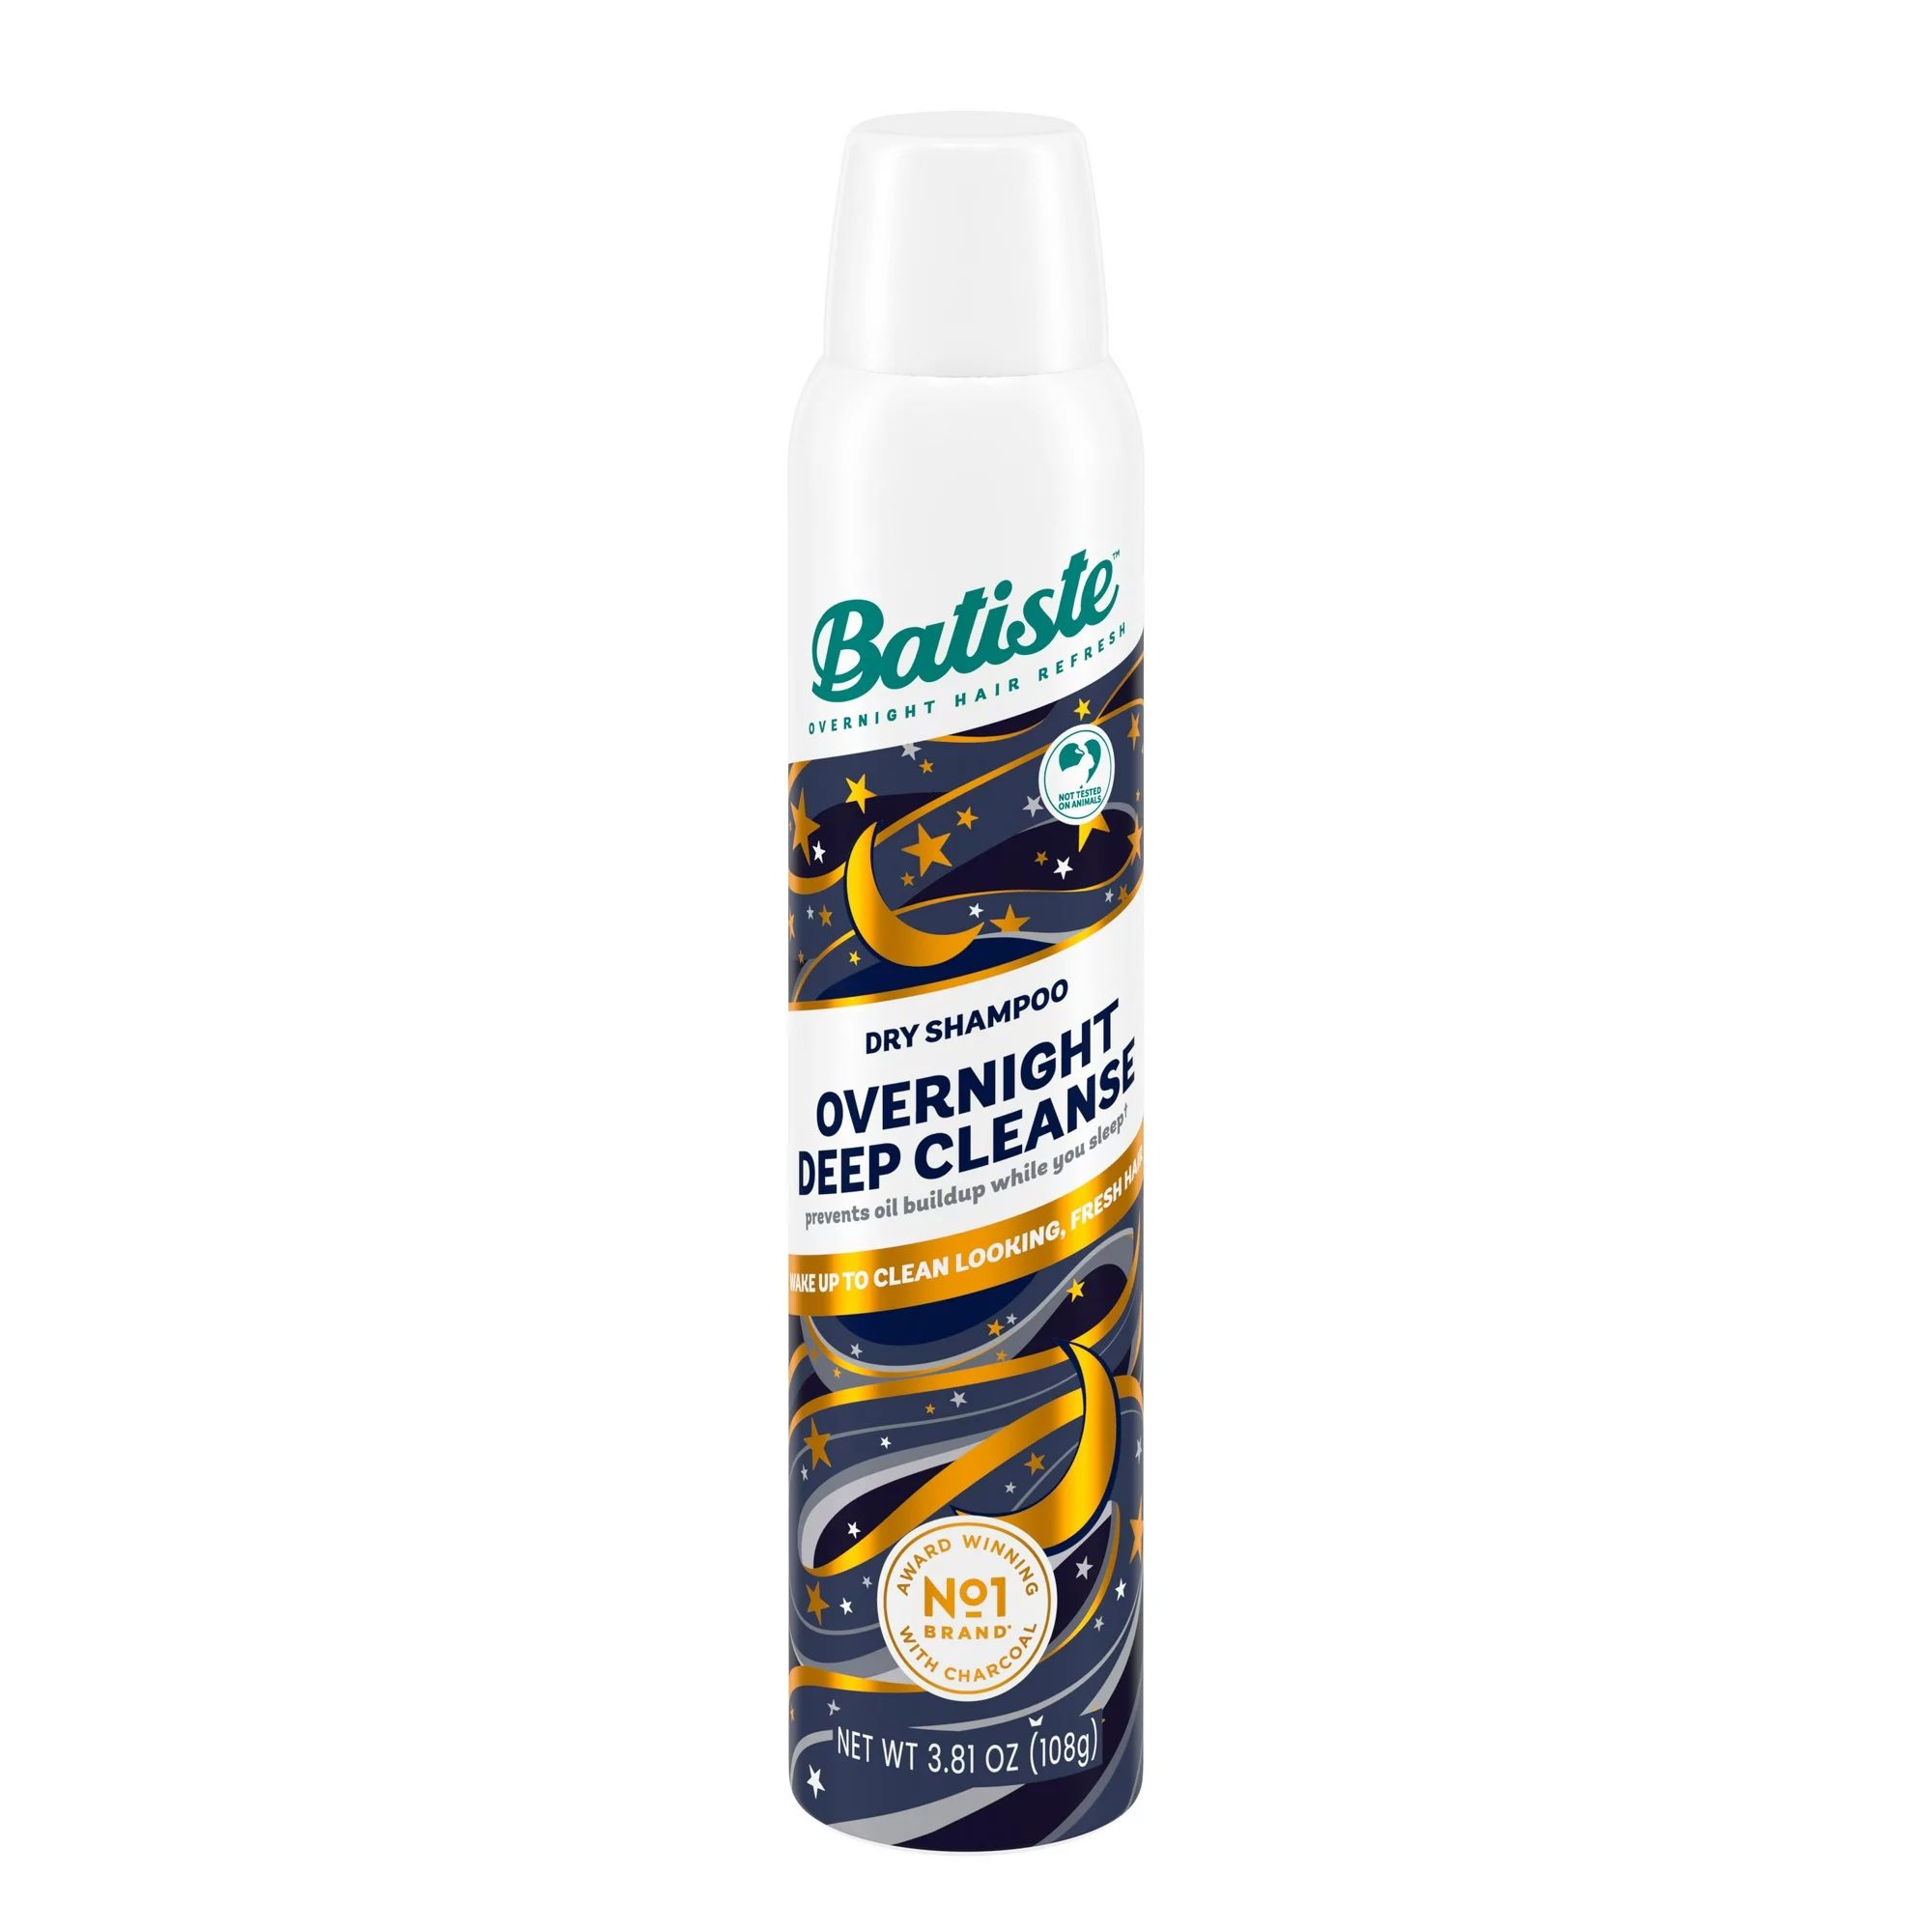 Batiste Overnight Deep Cleanse Dry Shampoo 3.81oz.- Wake up to beautiful hair by preventing oil b... | Walmart (US)